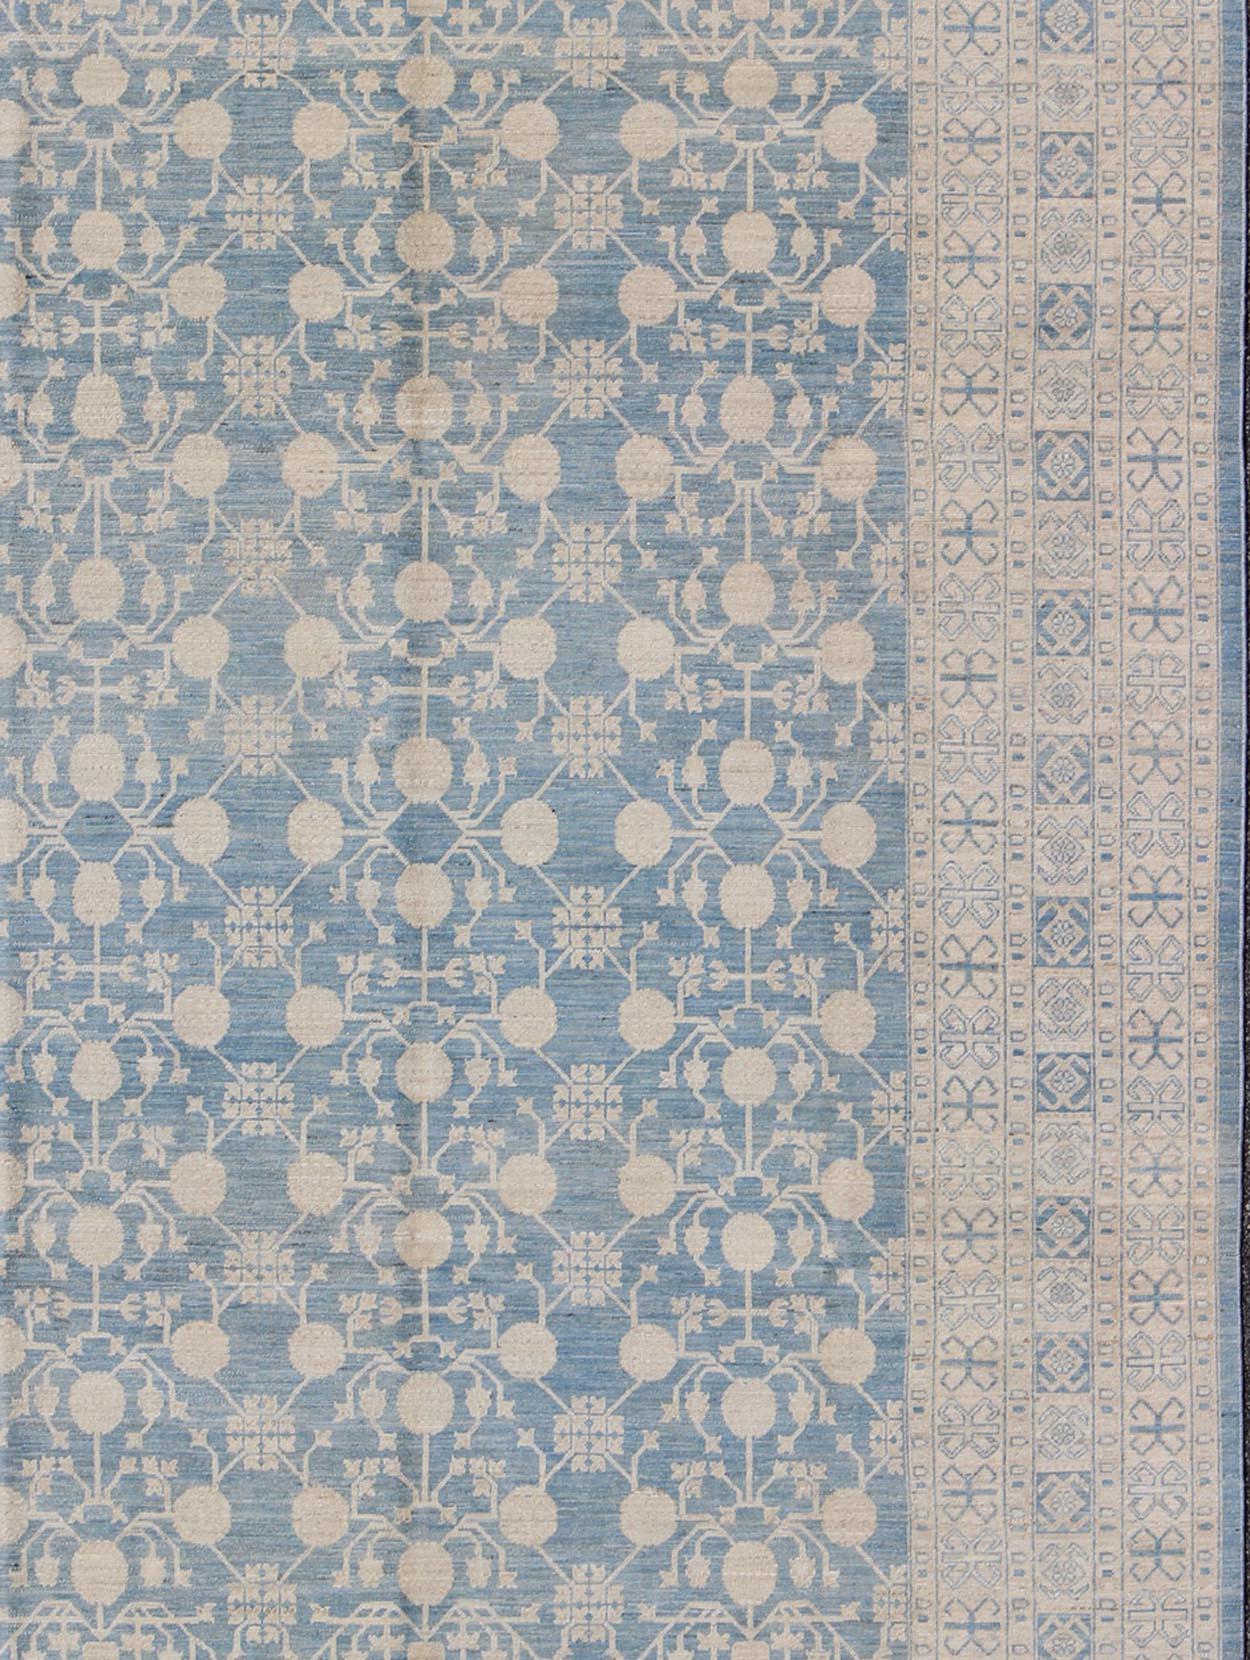 Large Pomegranate Design Modern Khotan Rug in Light Blue and Cream In New Condition For Sale In Atlanta, GA